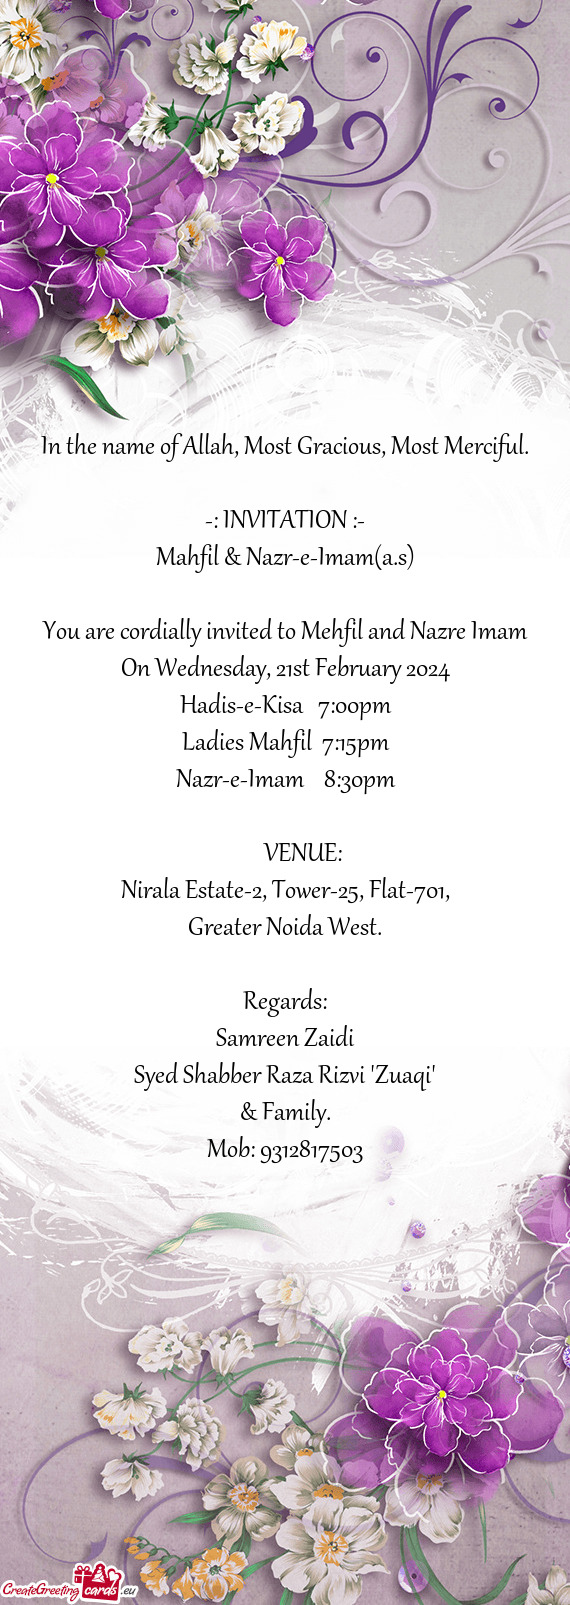 You are cordially invited to Mehfil and Nazre Imam